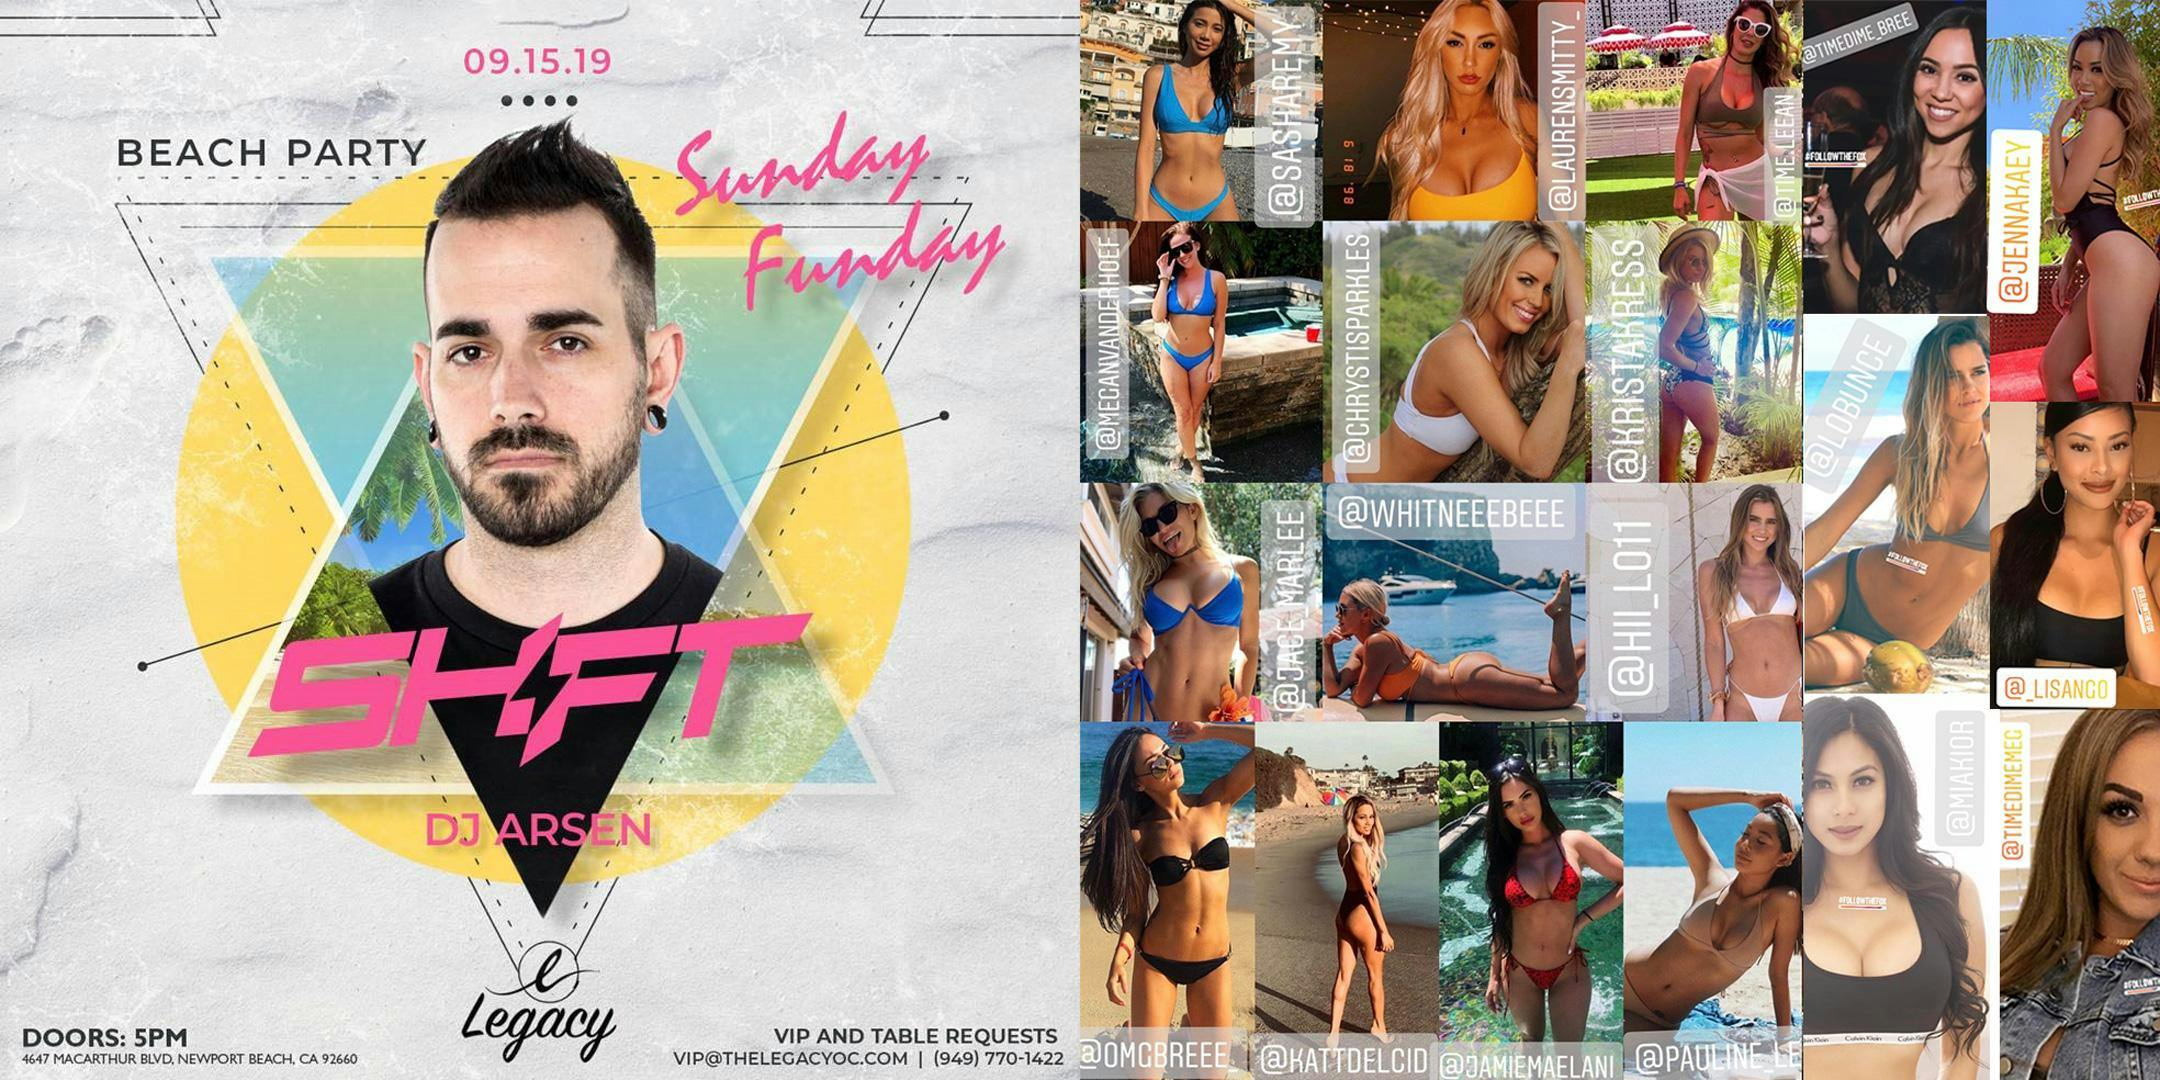 Sunday Funday Beach Party @ Legacy with DJ SHFT | Hosted by TIME DIMES